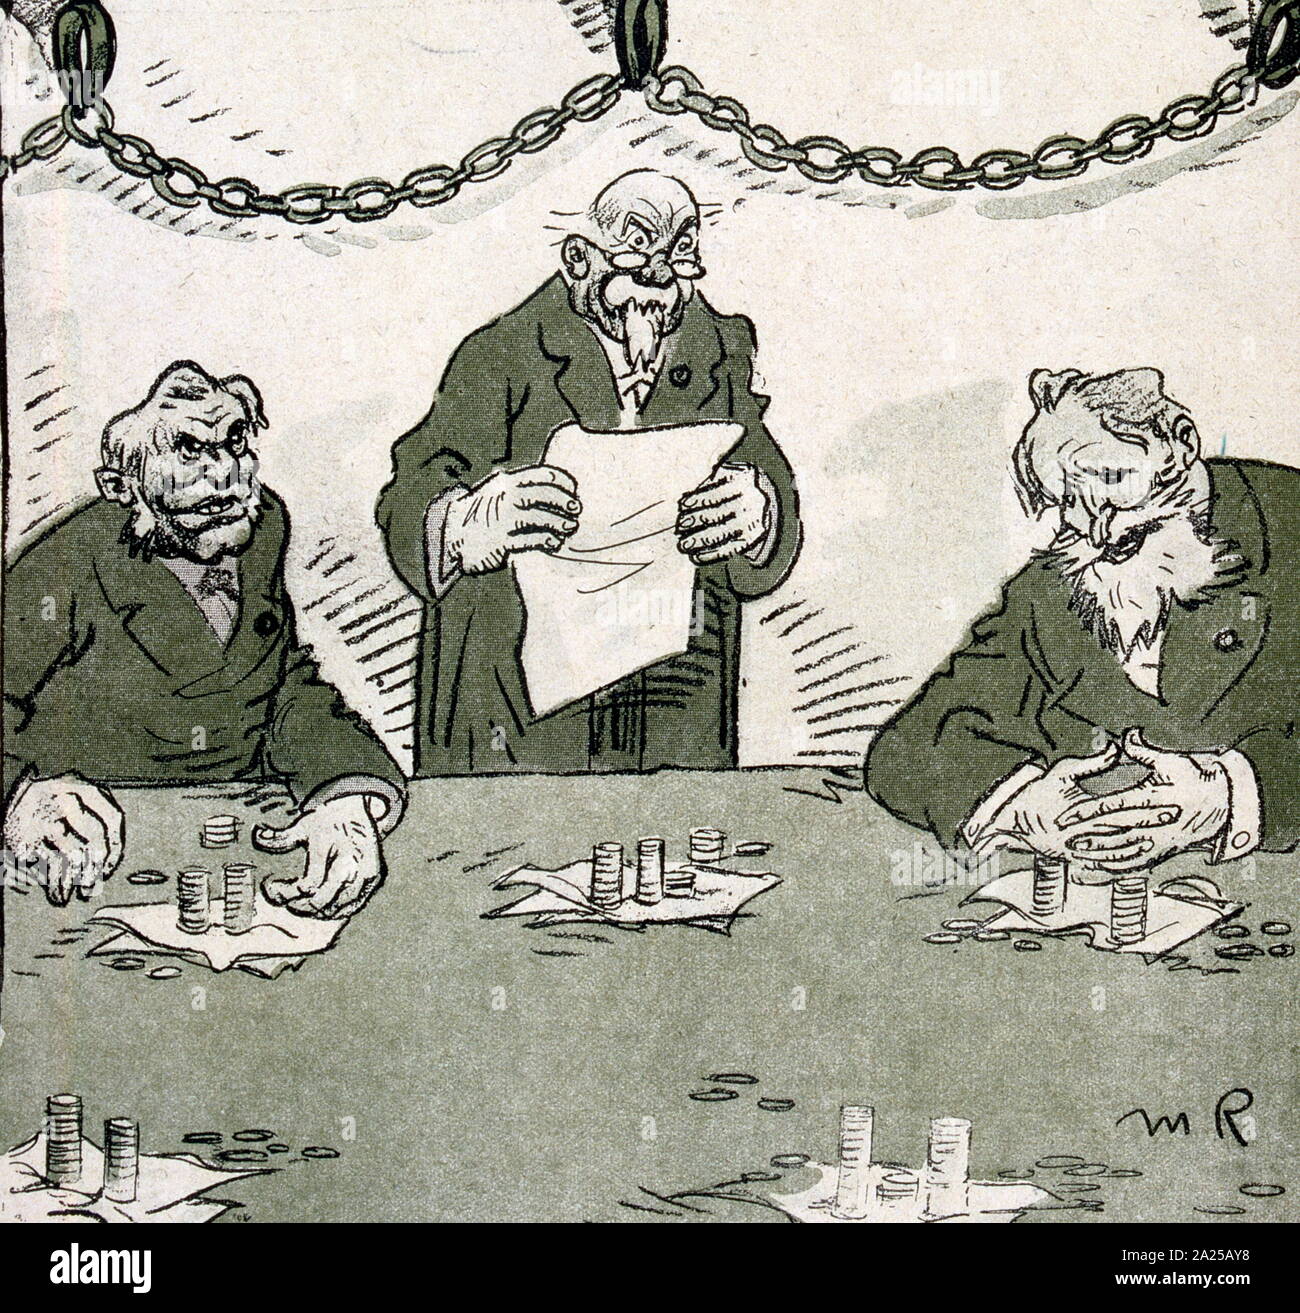 1909 French illustration depicting a group of bankers Stock Photo